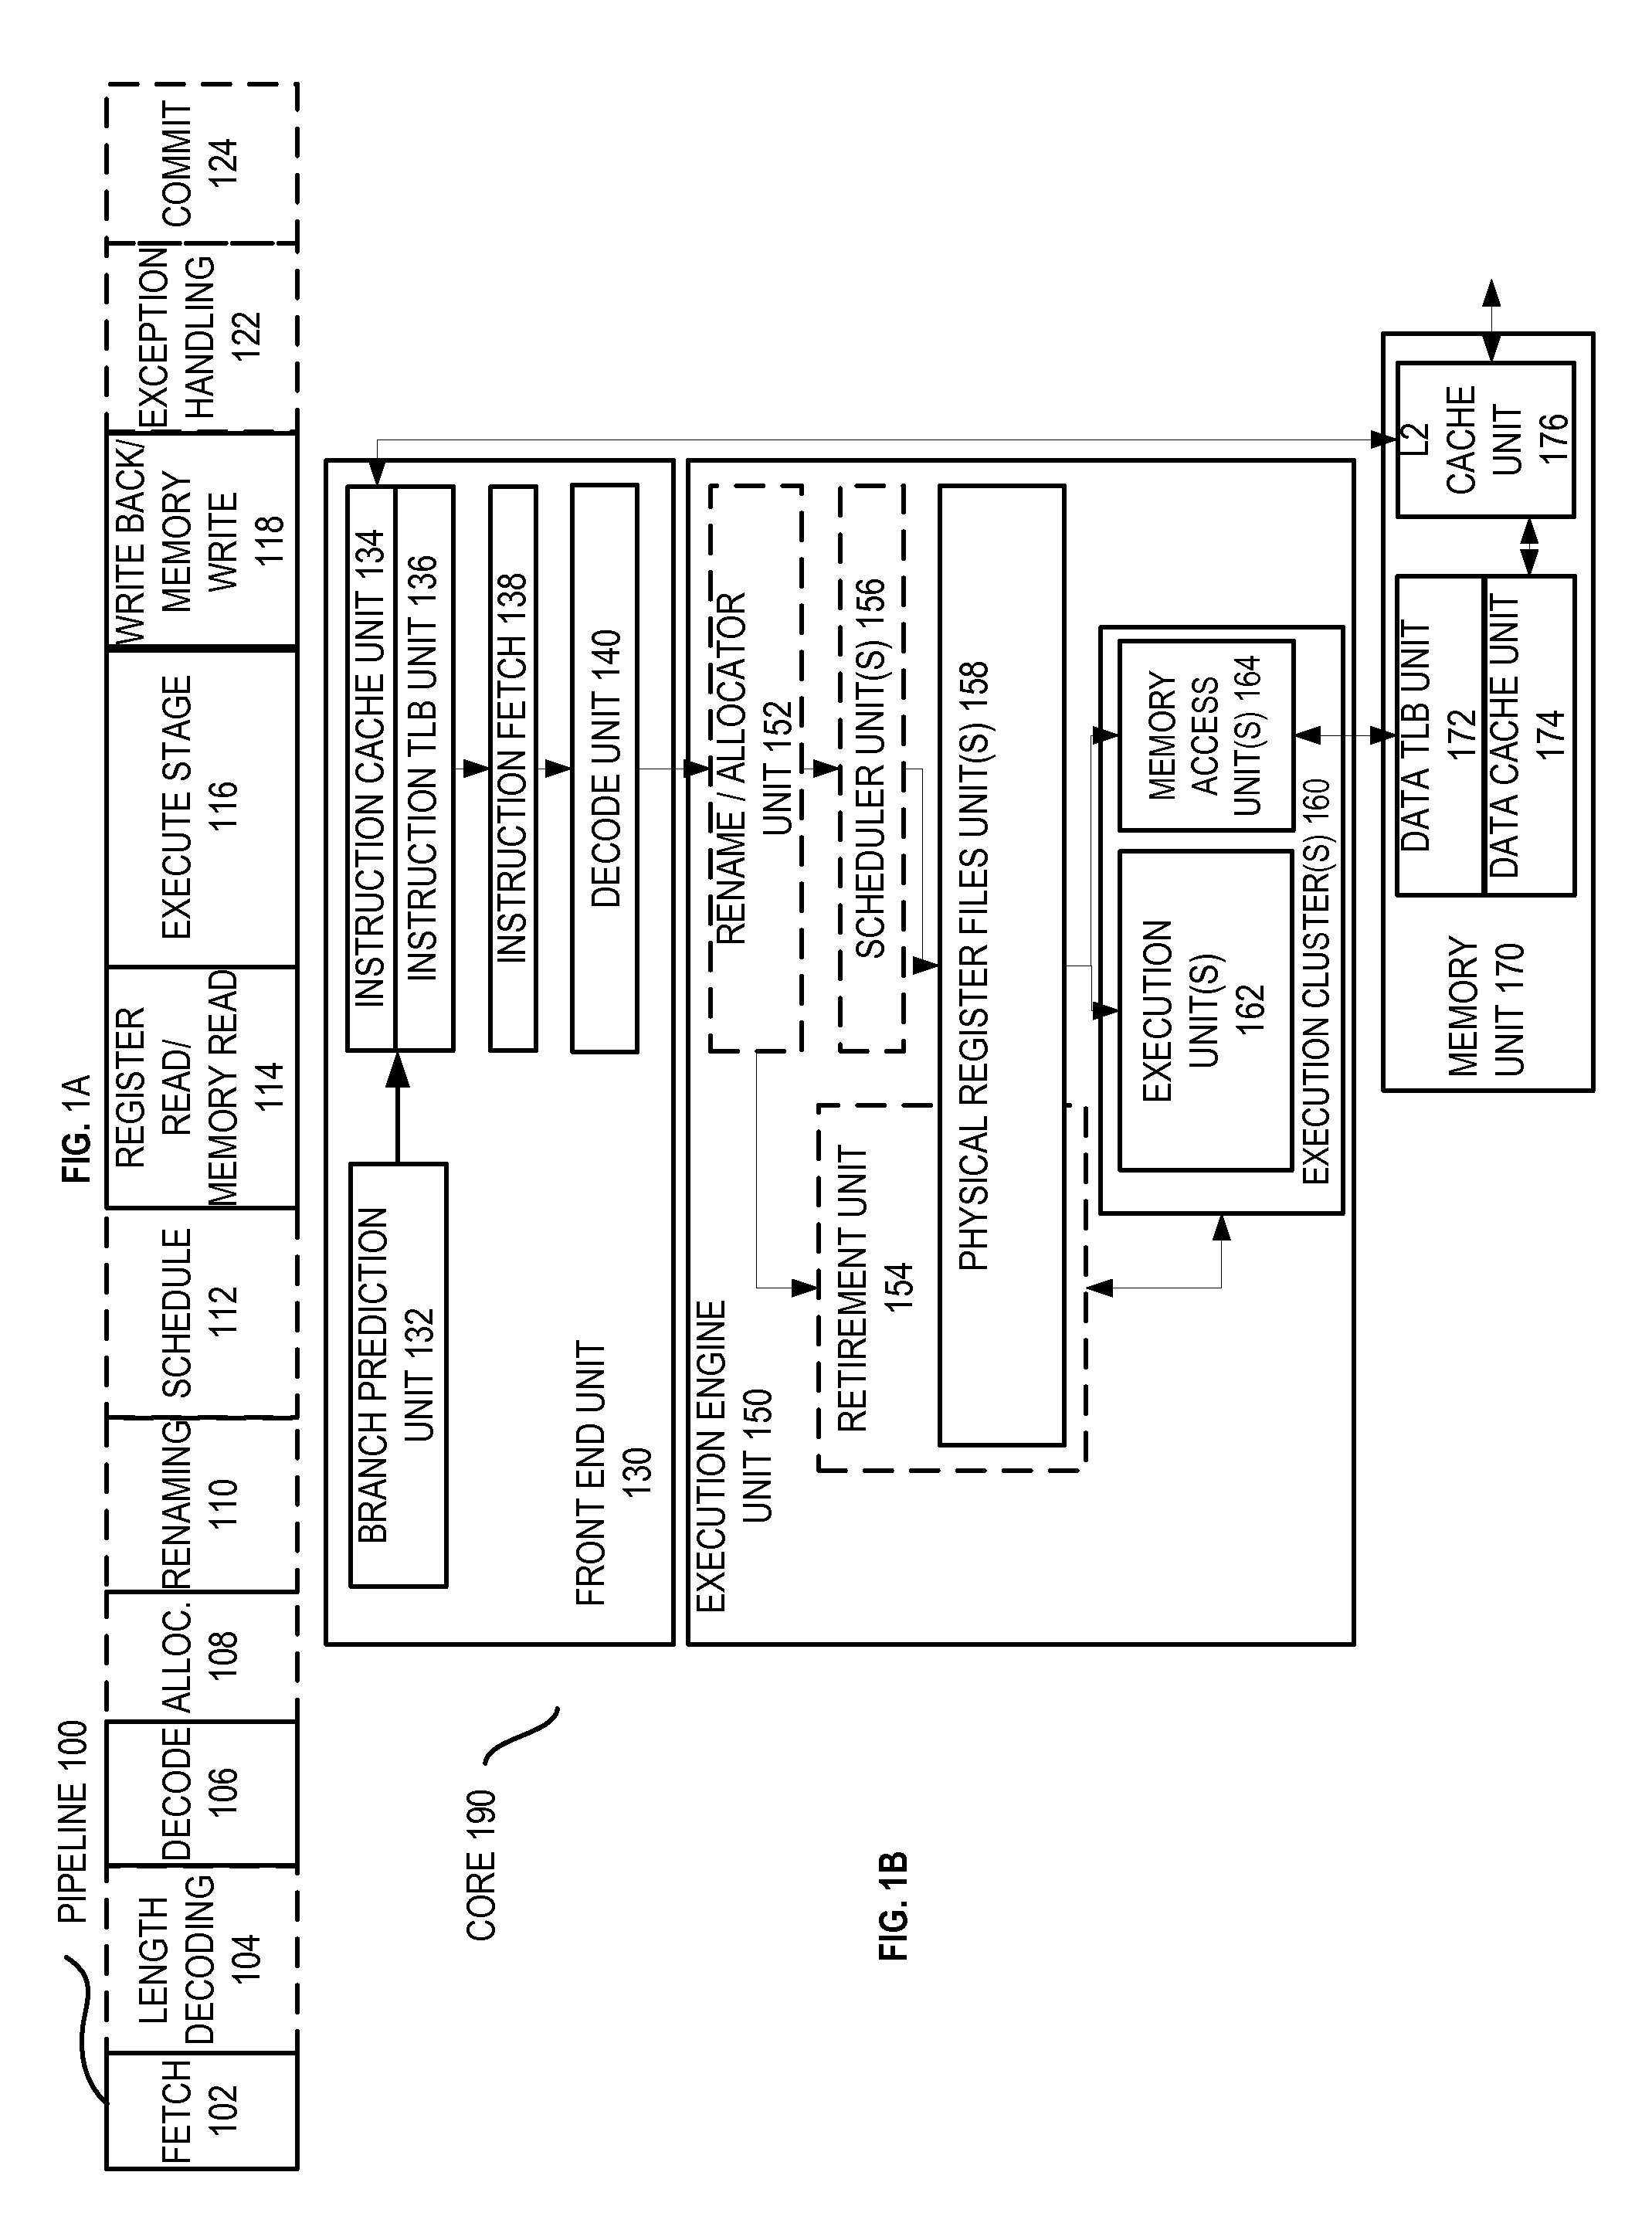 Method and apparatus for continued retirement during commit of a speculative region of code